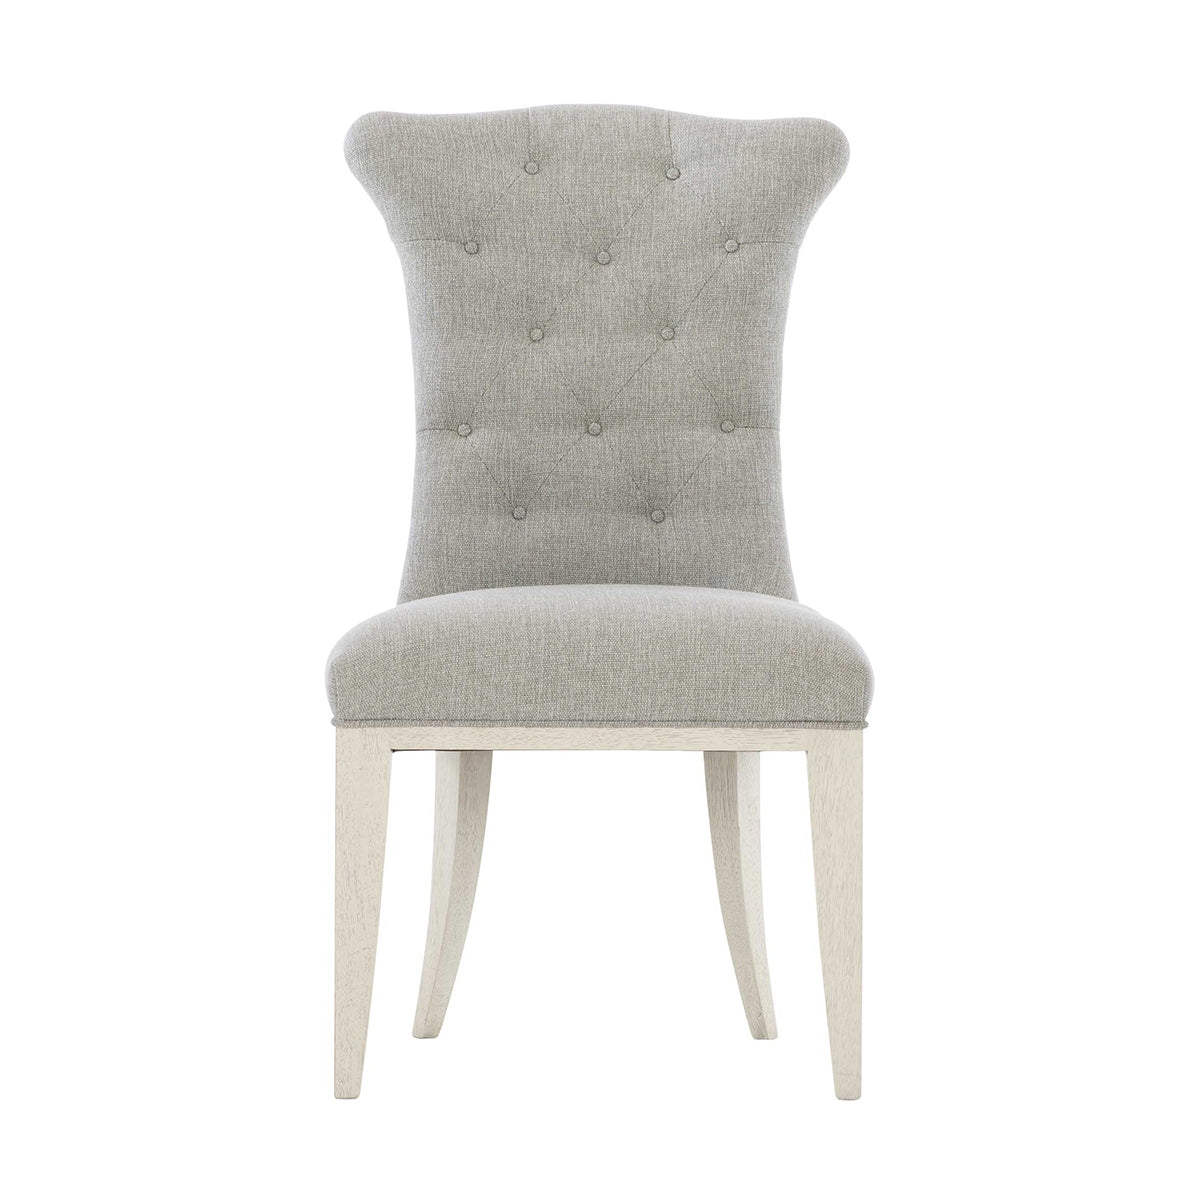 ALLURE DINING CHAIR